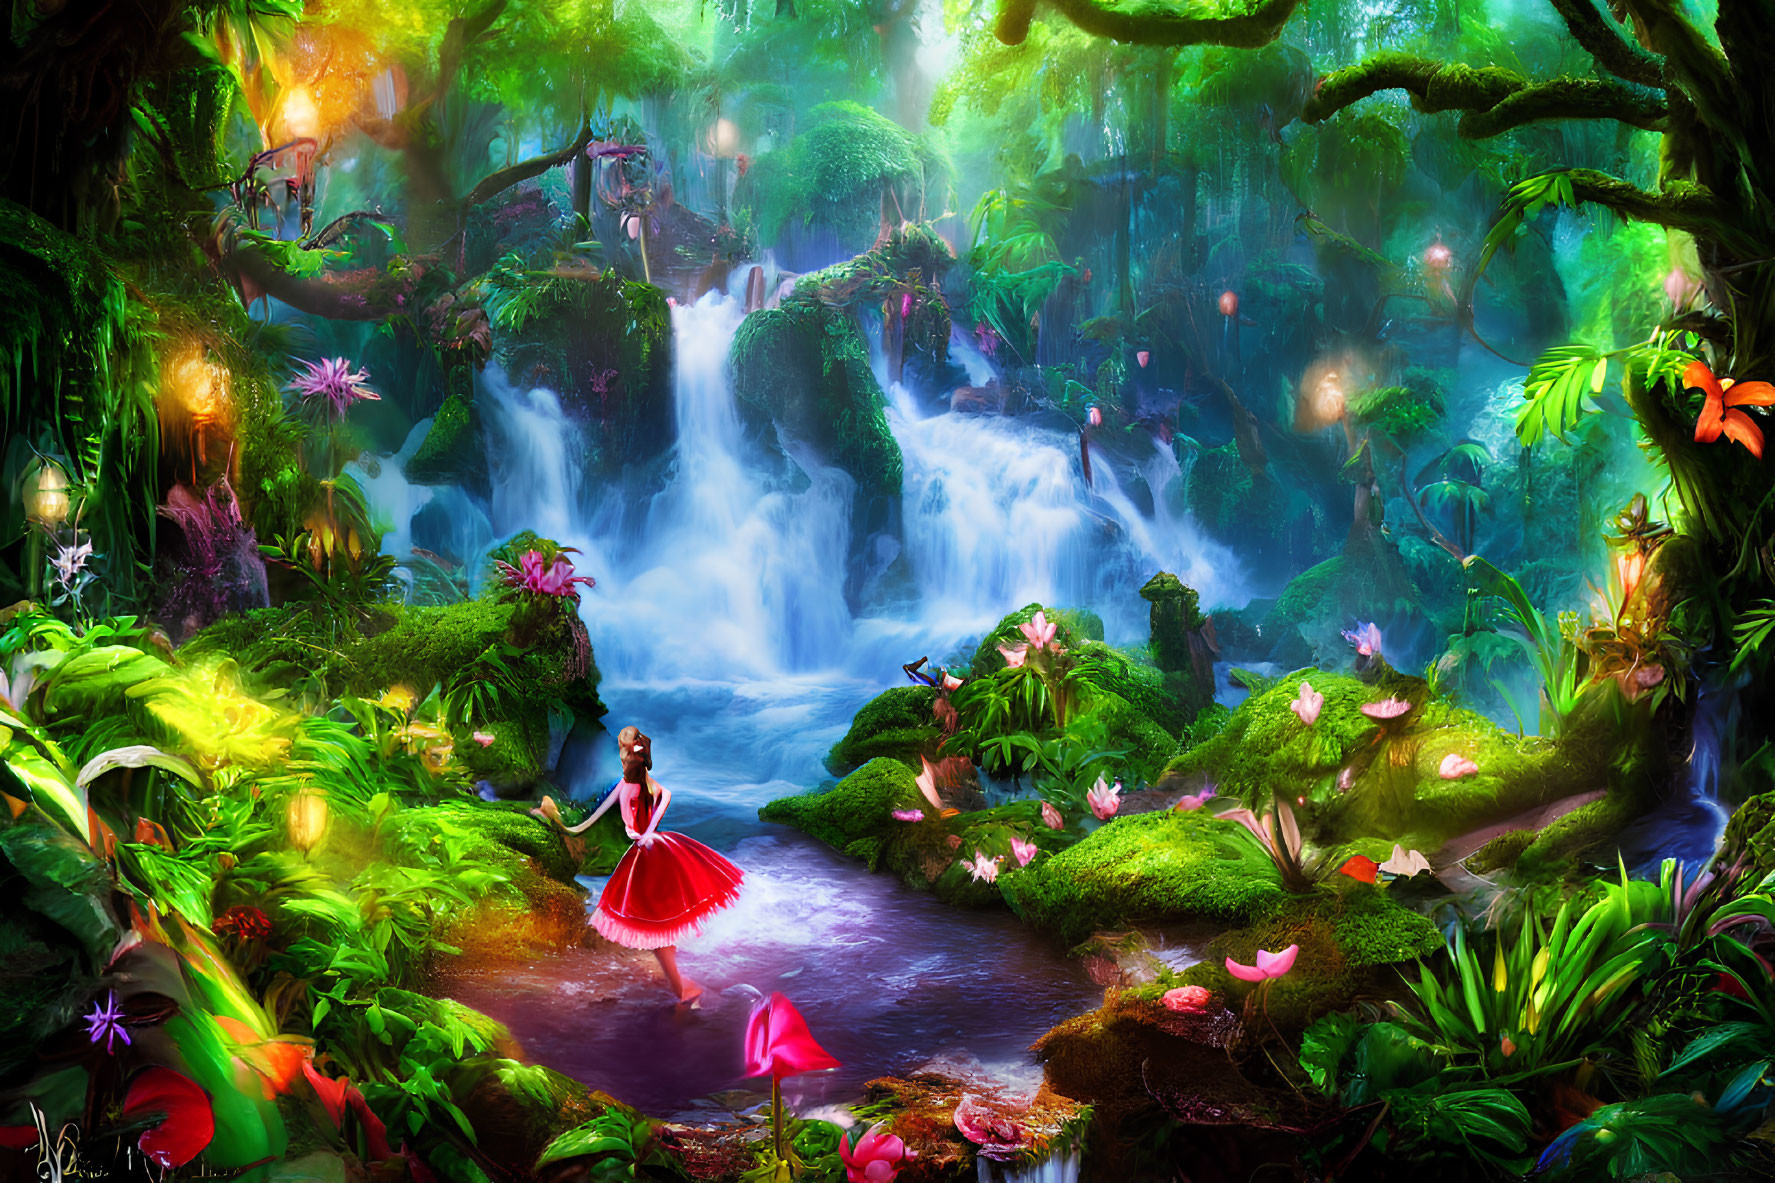 Colorful Fantasy Landscape with Waterfall and Figure in Red Dress